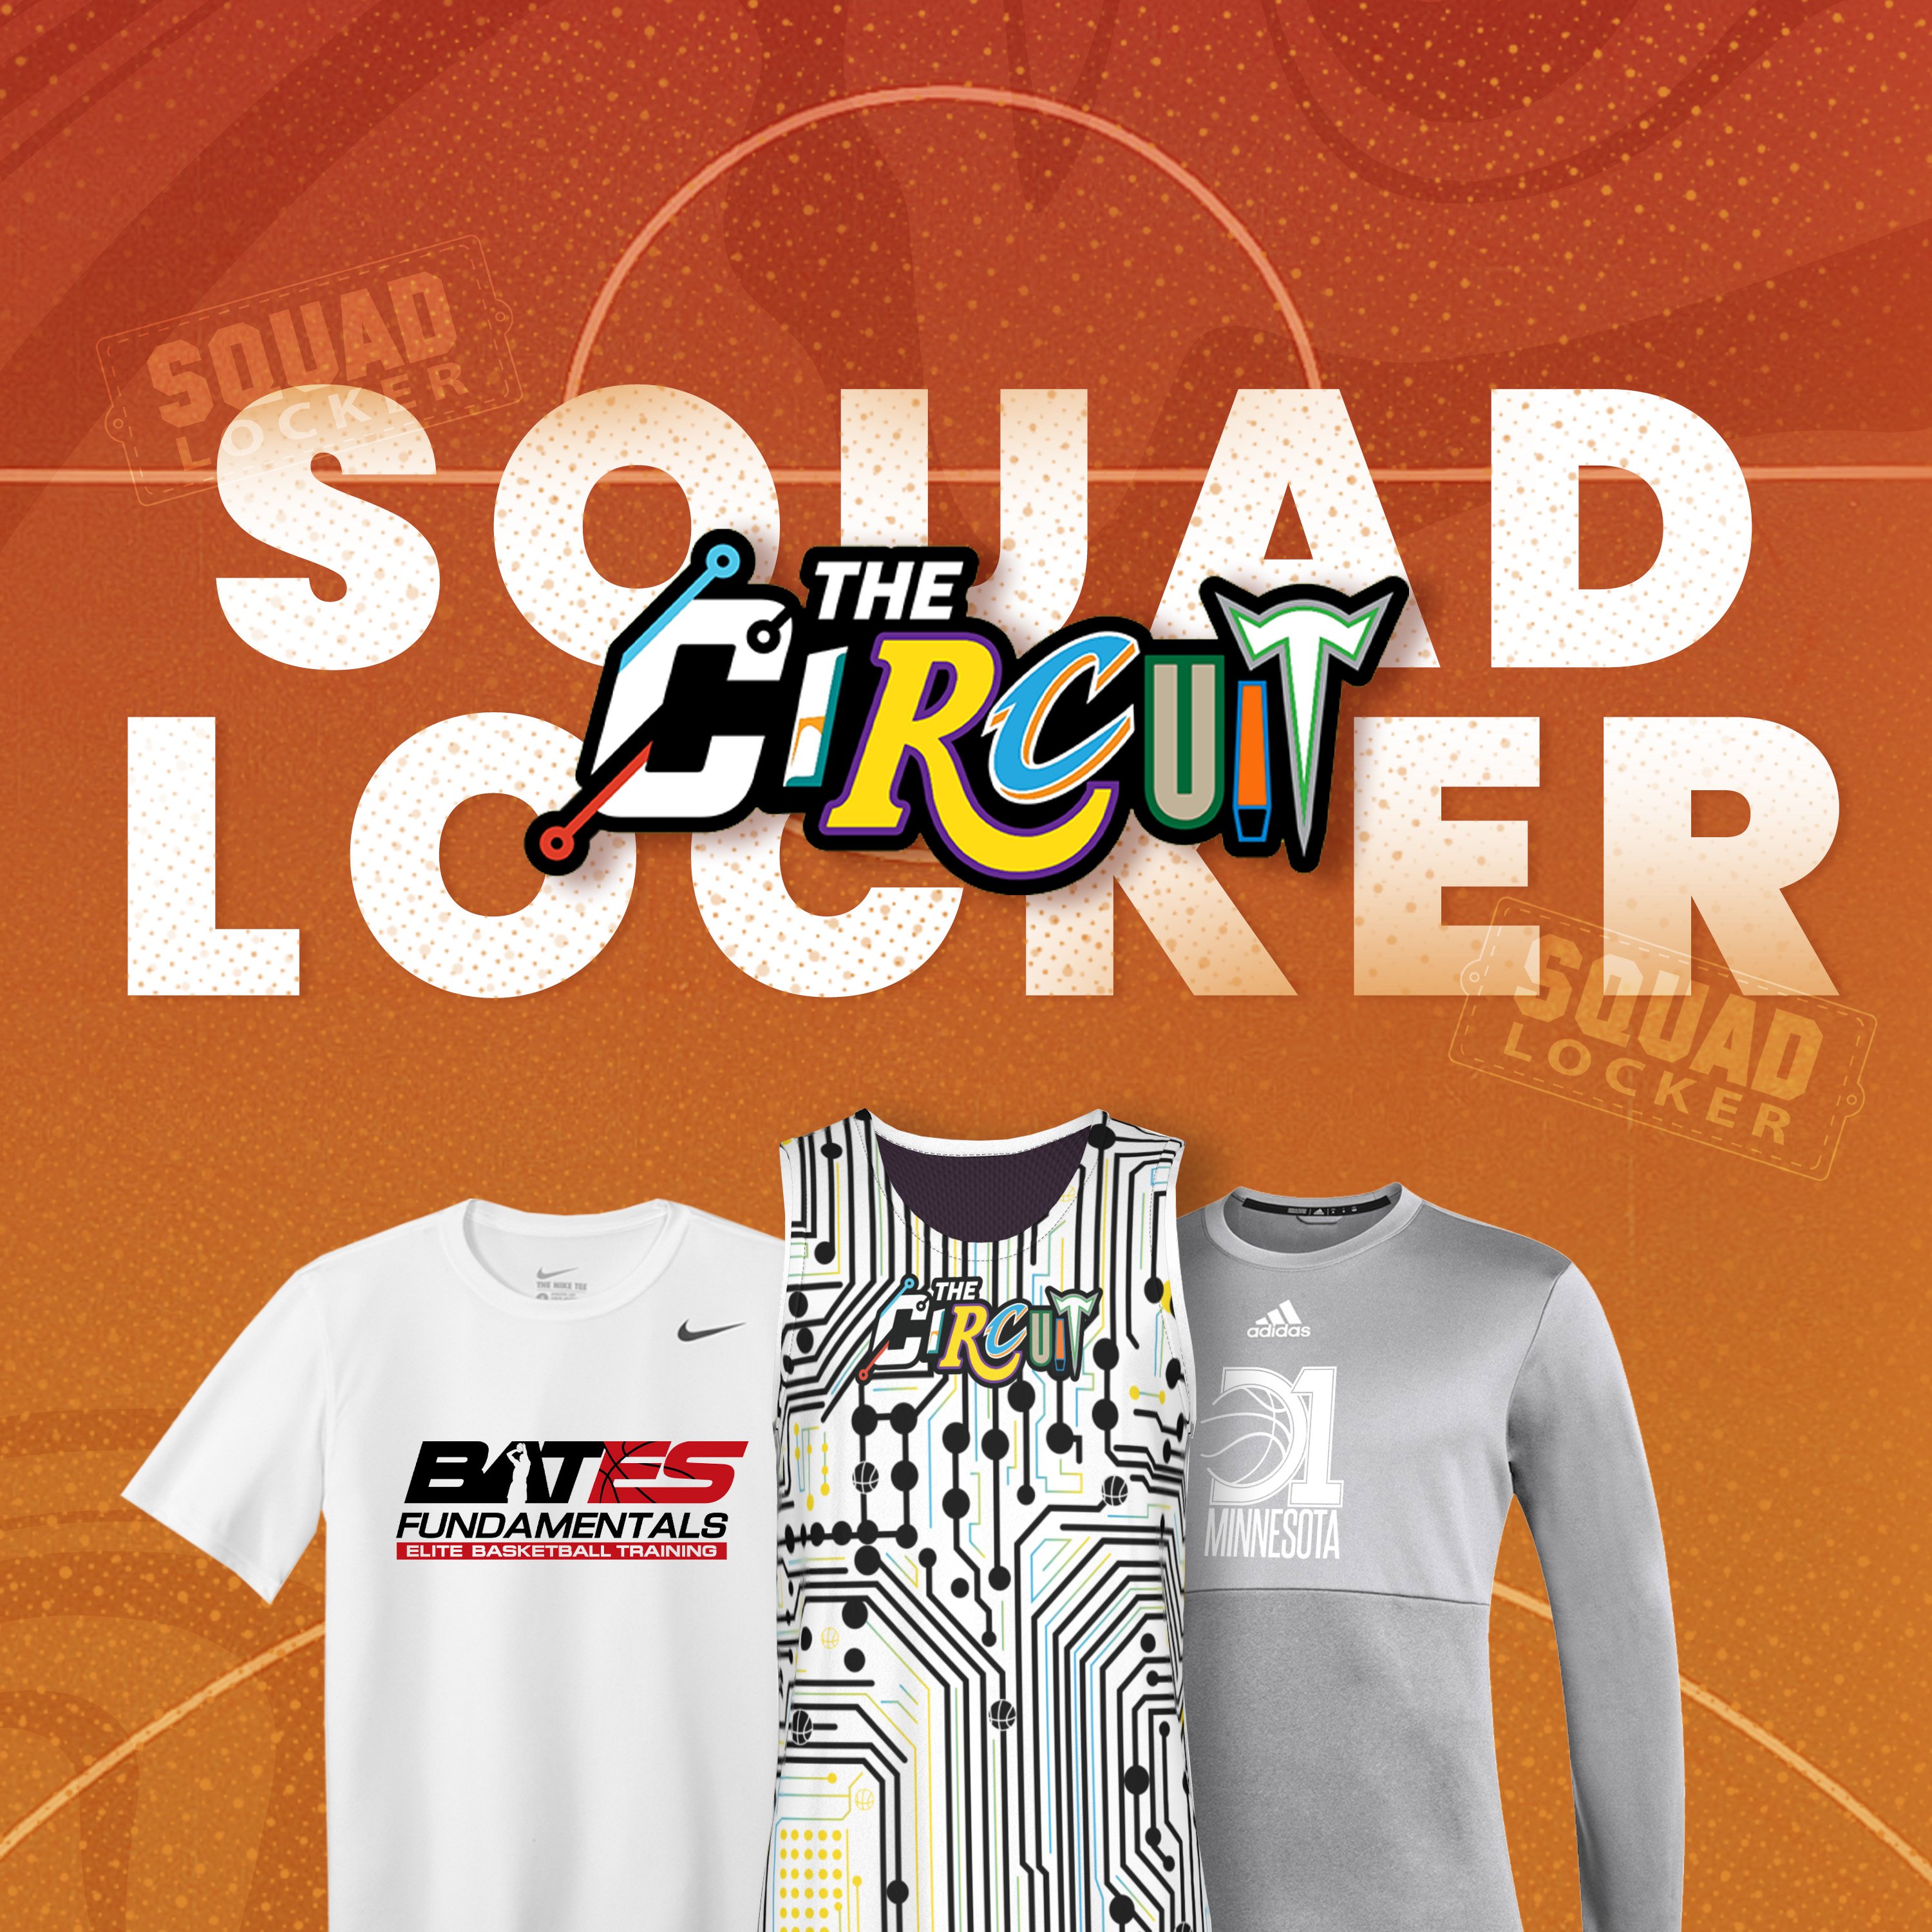 SquadLocker Teams Up with The Circuit as the Official Team Store Provider of Grassroots Basketball